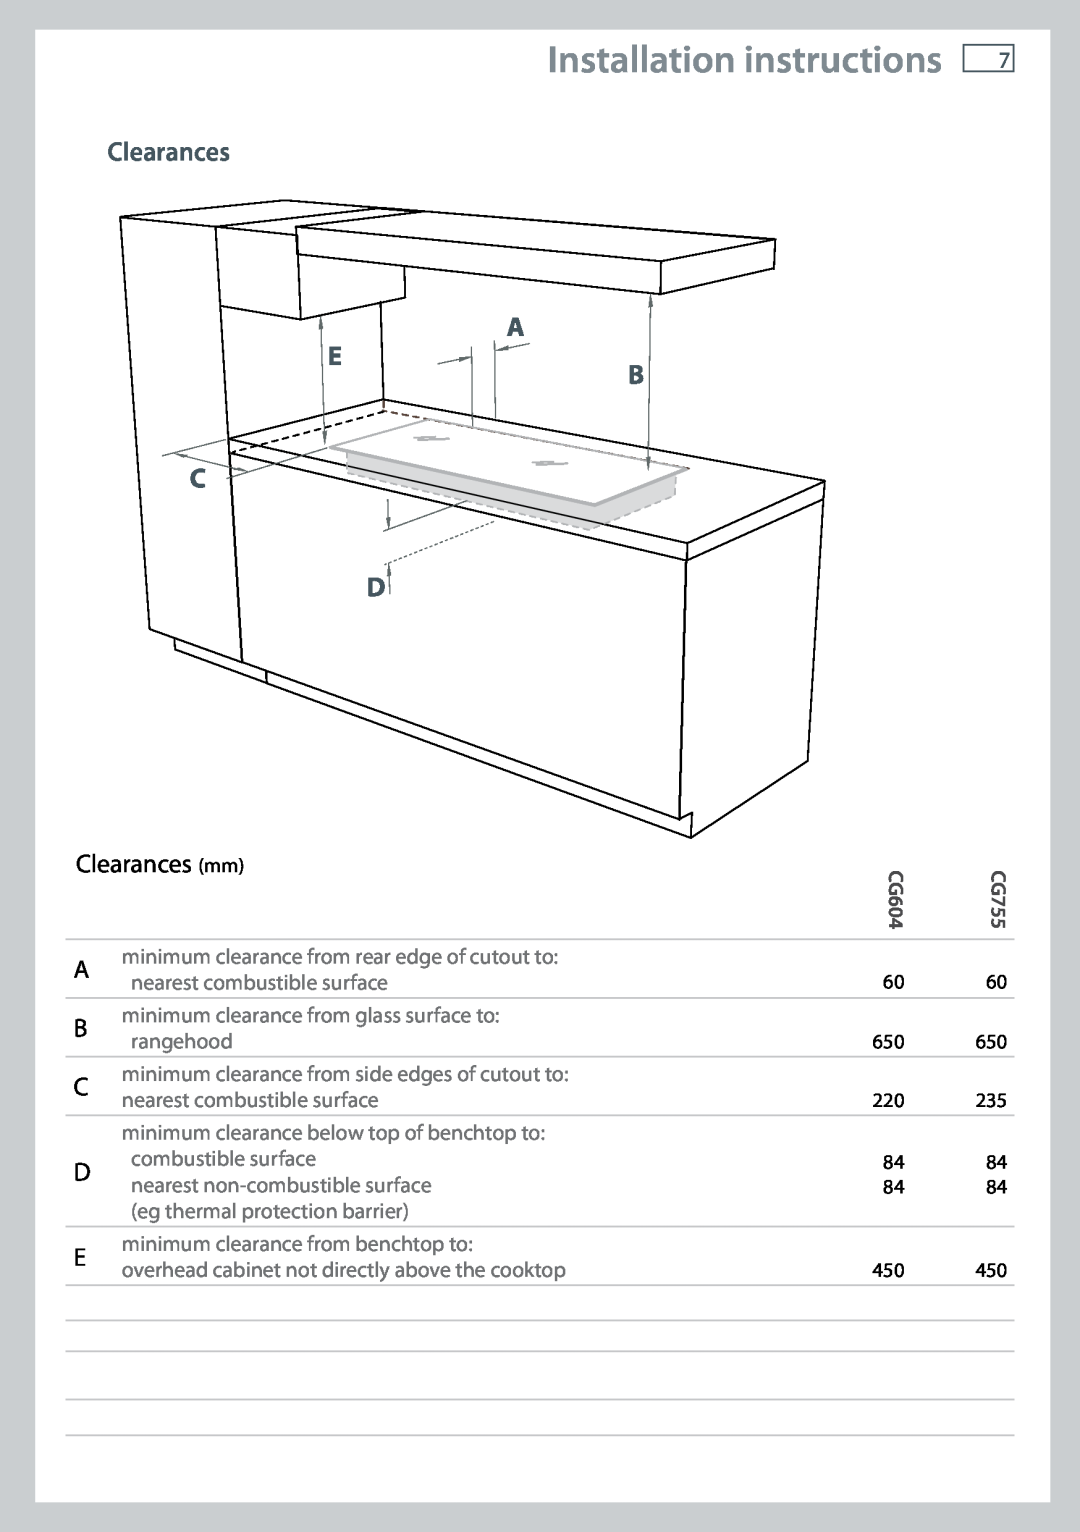 Fisher & Paykel CG755 installation instructions Clearances A, Installation instructions, Clearances mm, CG604 